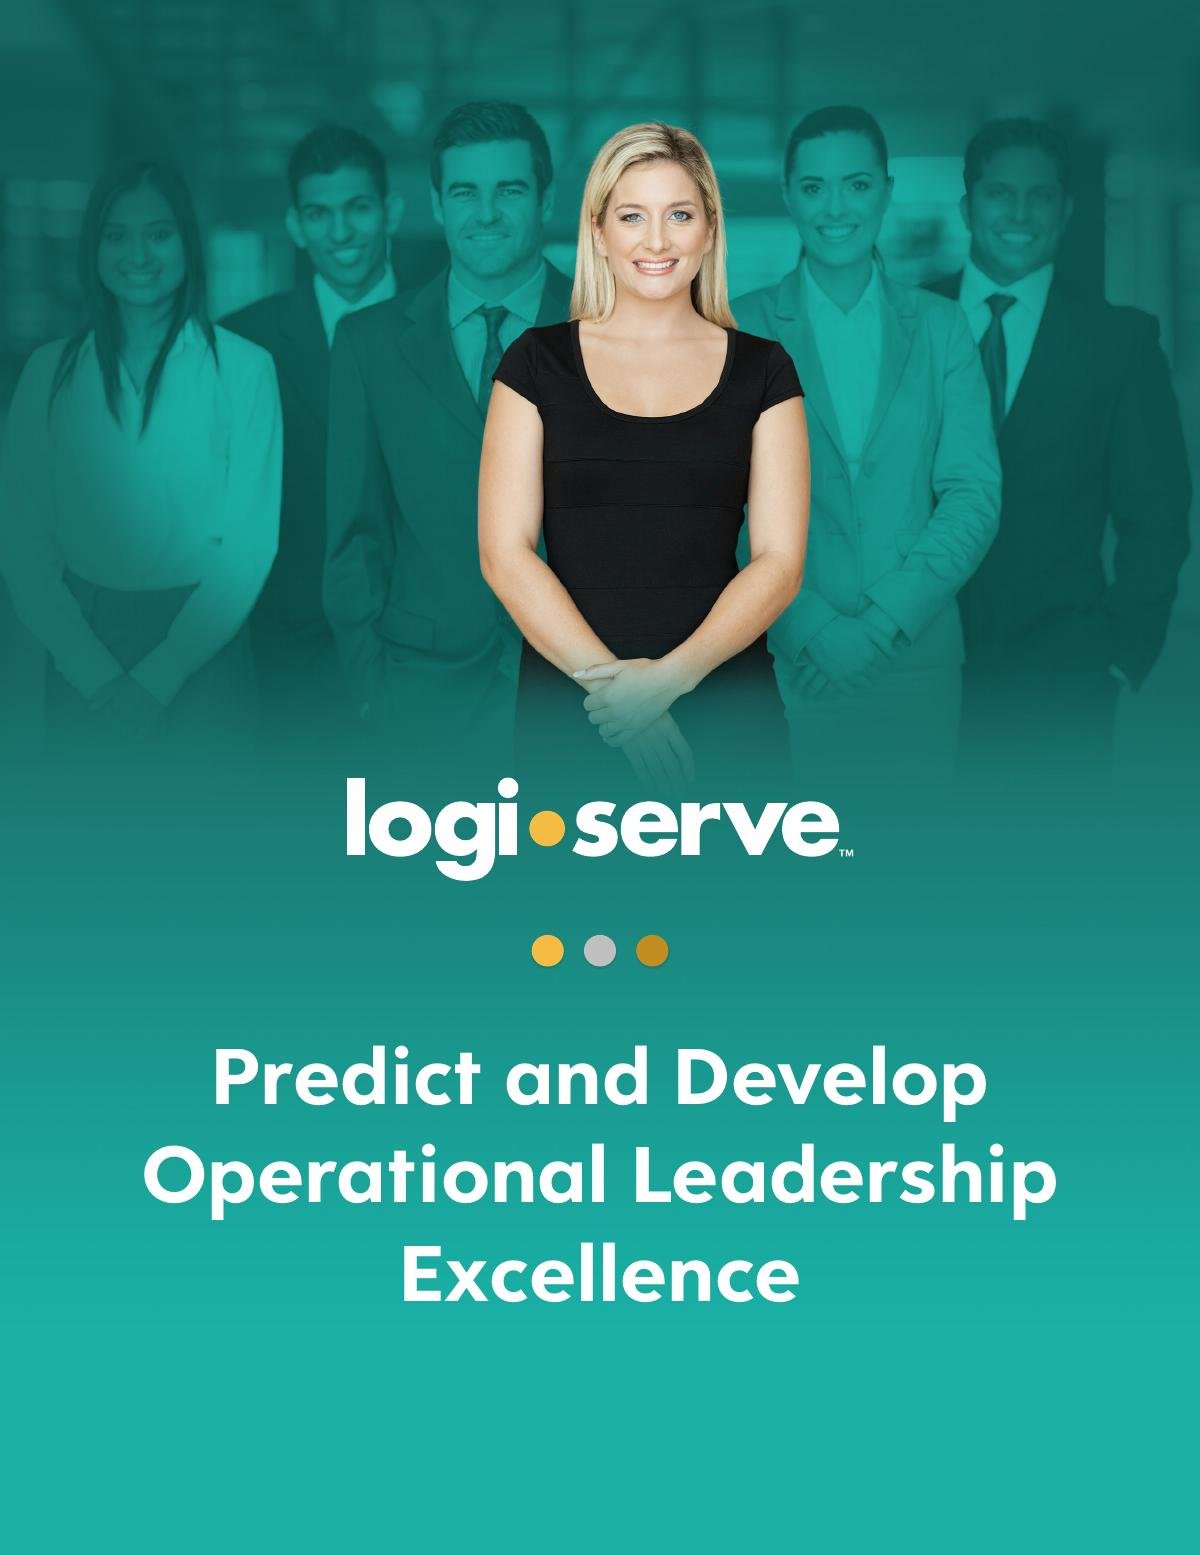 Predict and Develop Operational Leadership Excellence